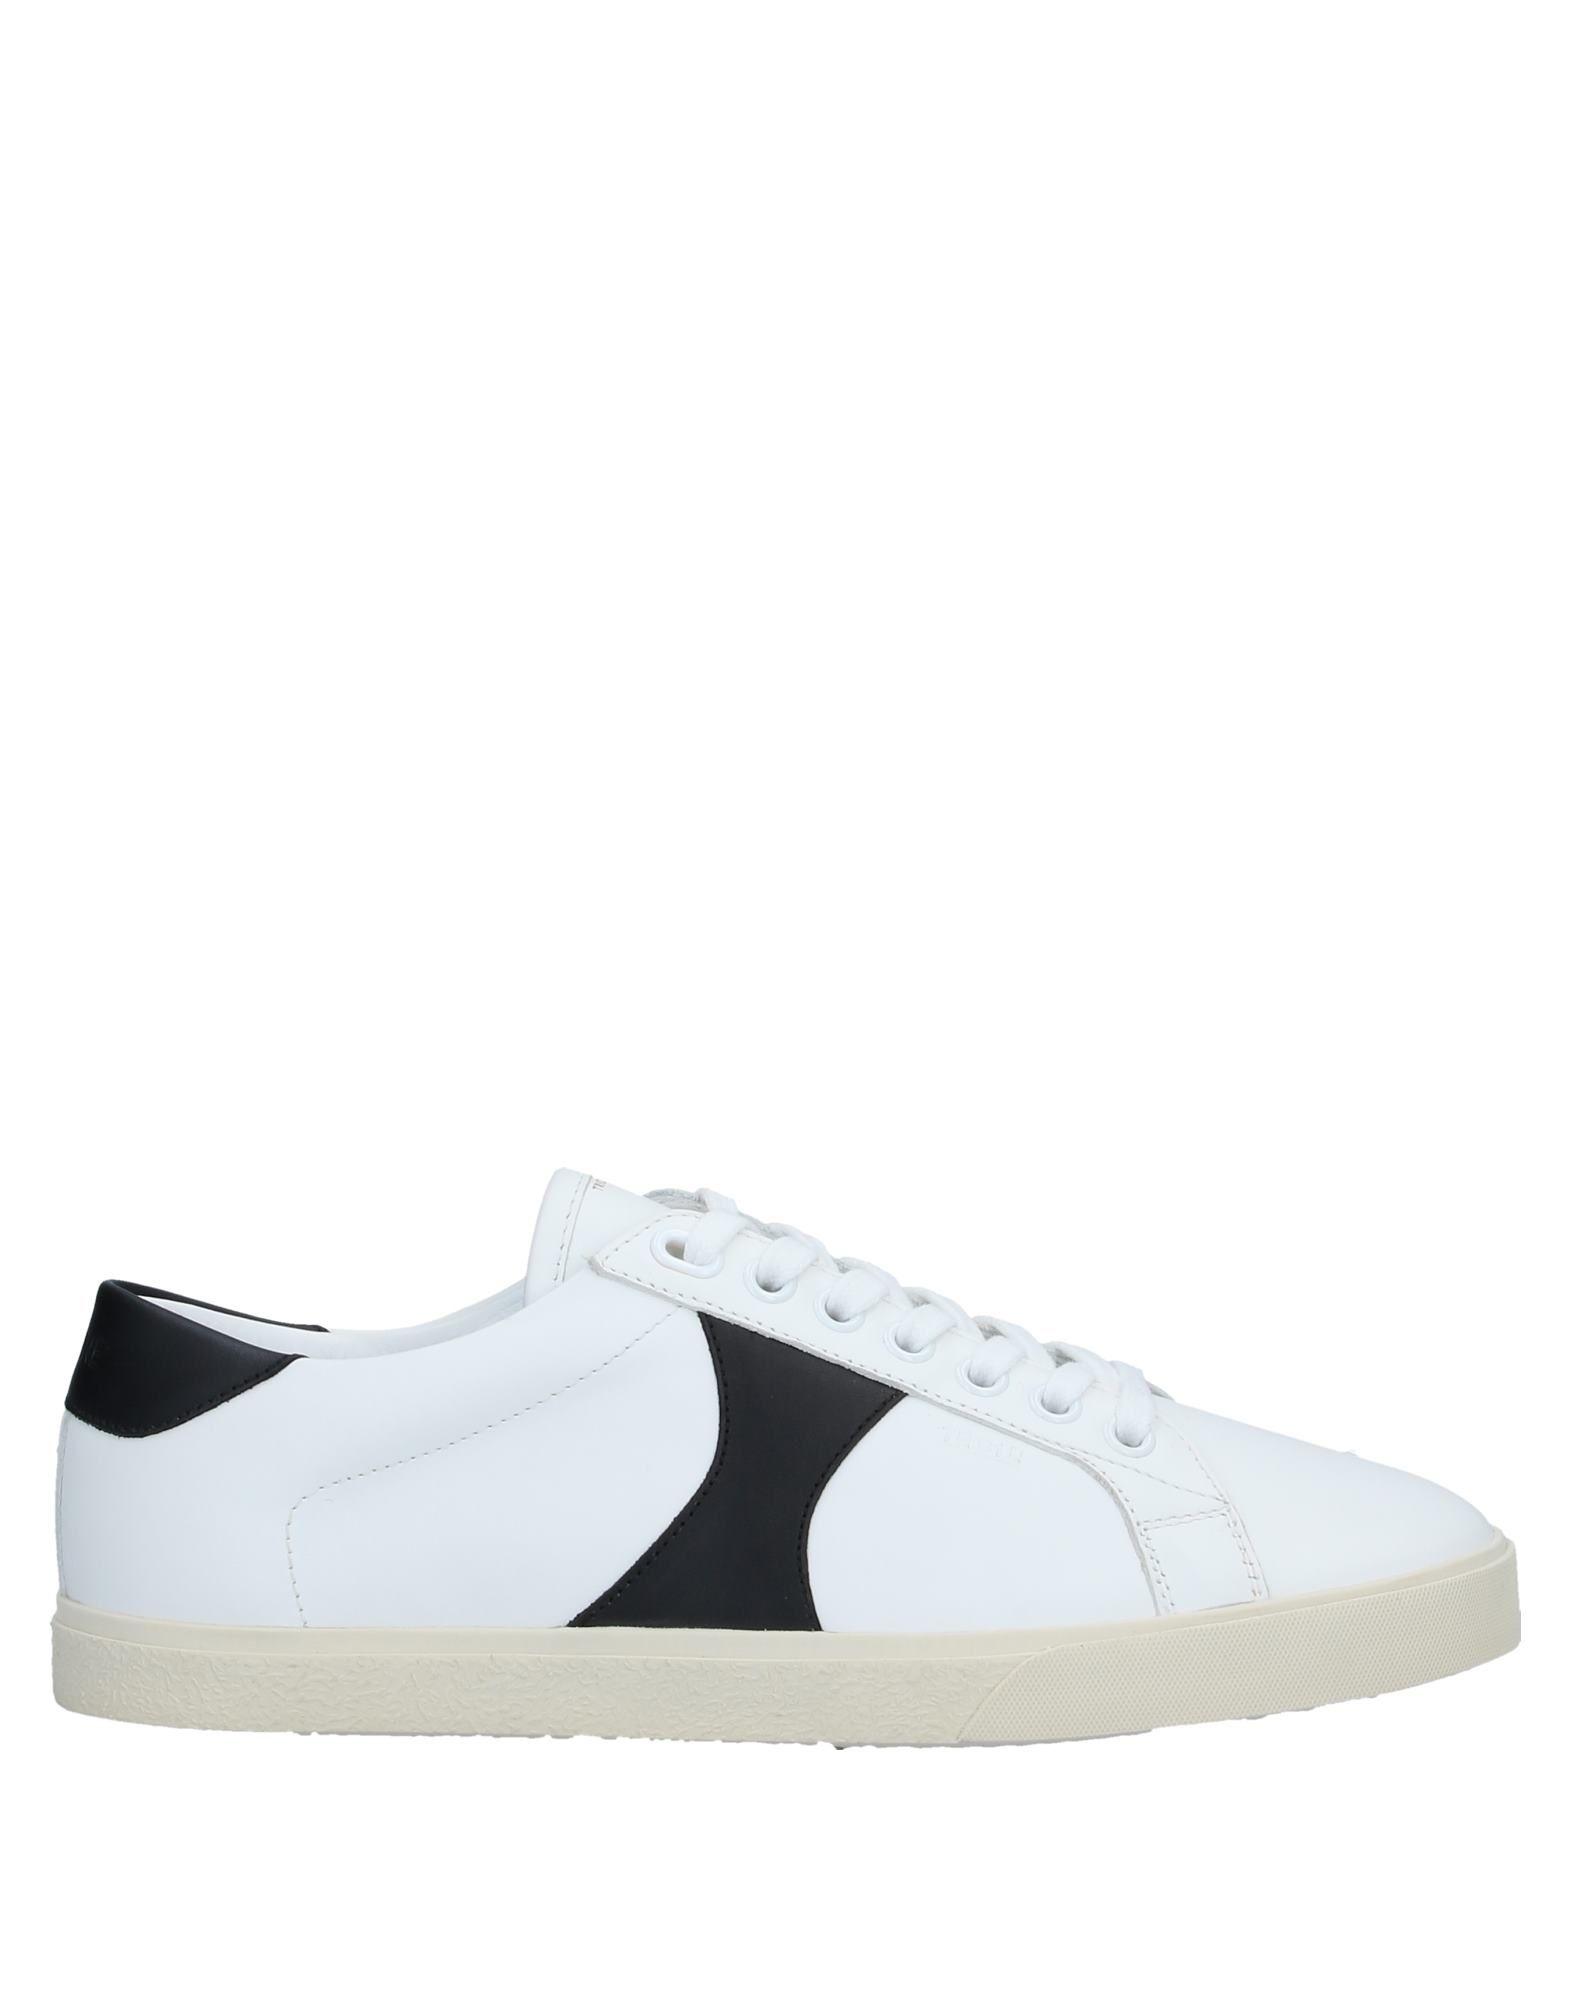 Celine Triomphe Lace-up Leather Sneaker in White - Lyst